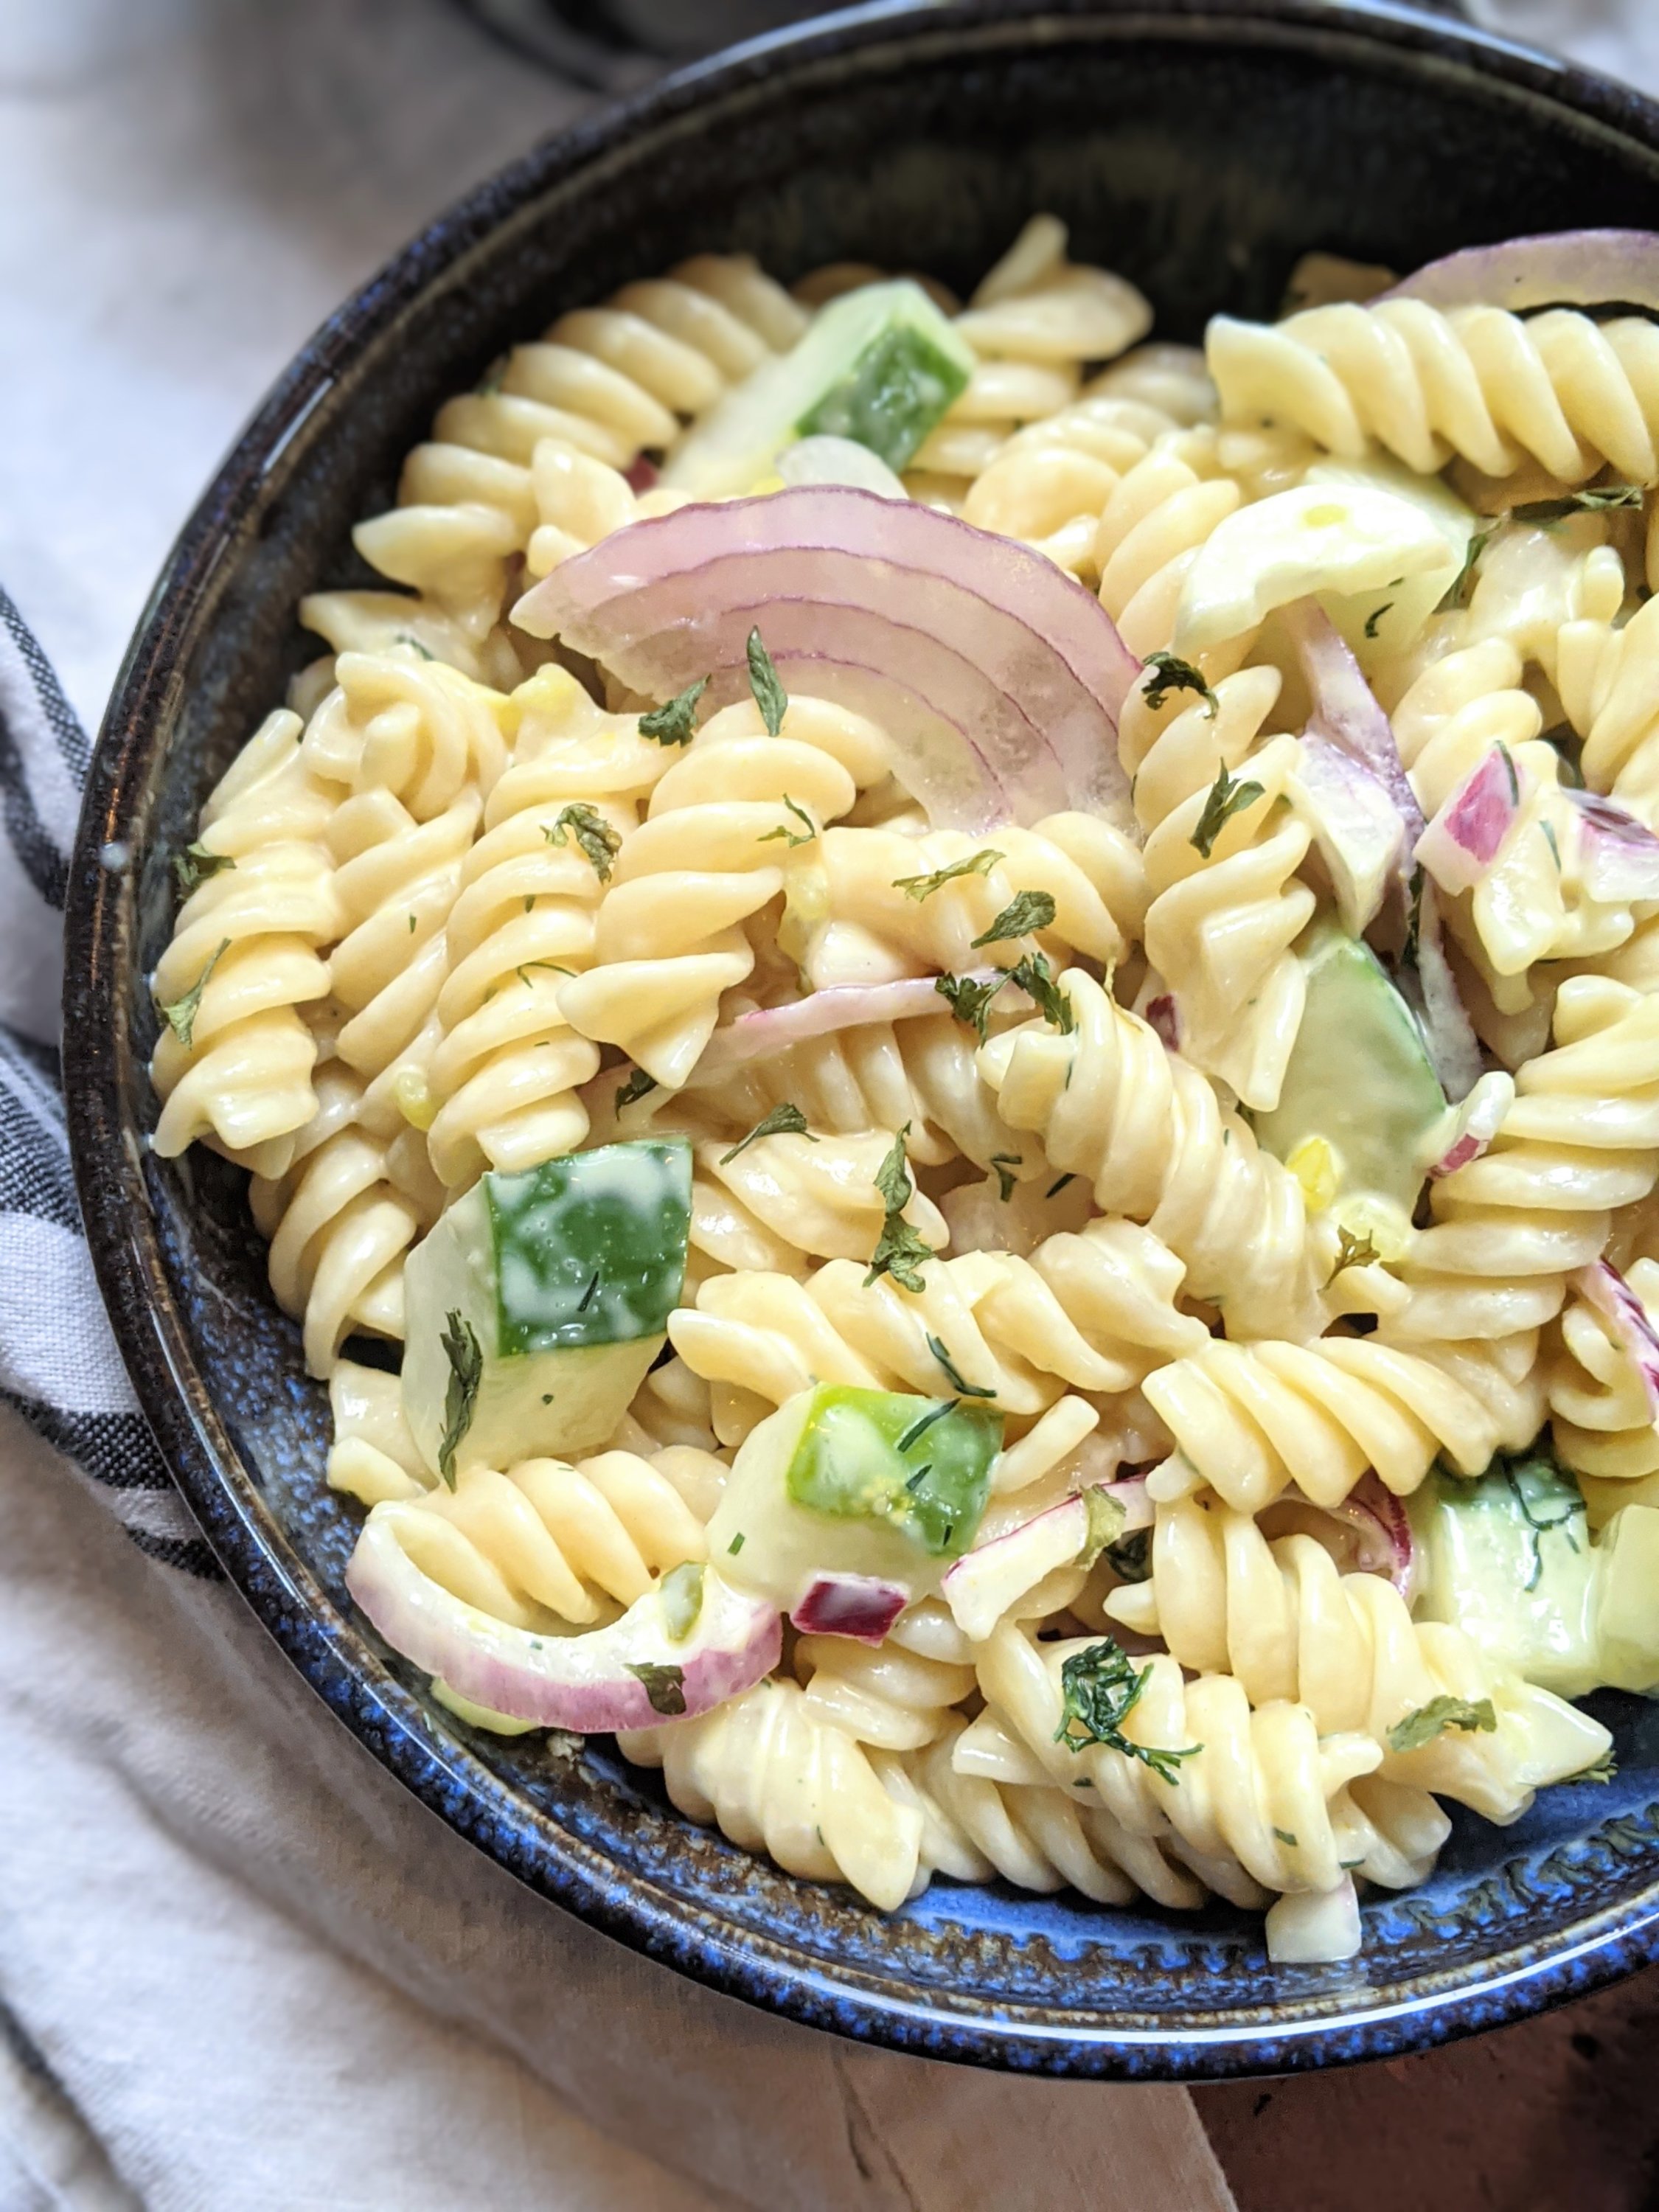 vegan creamy pasta salad recipe homemade with cucumbers from garden recipe healthy easy homemade meal prep make ahead pasta salad for summer bbq 